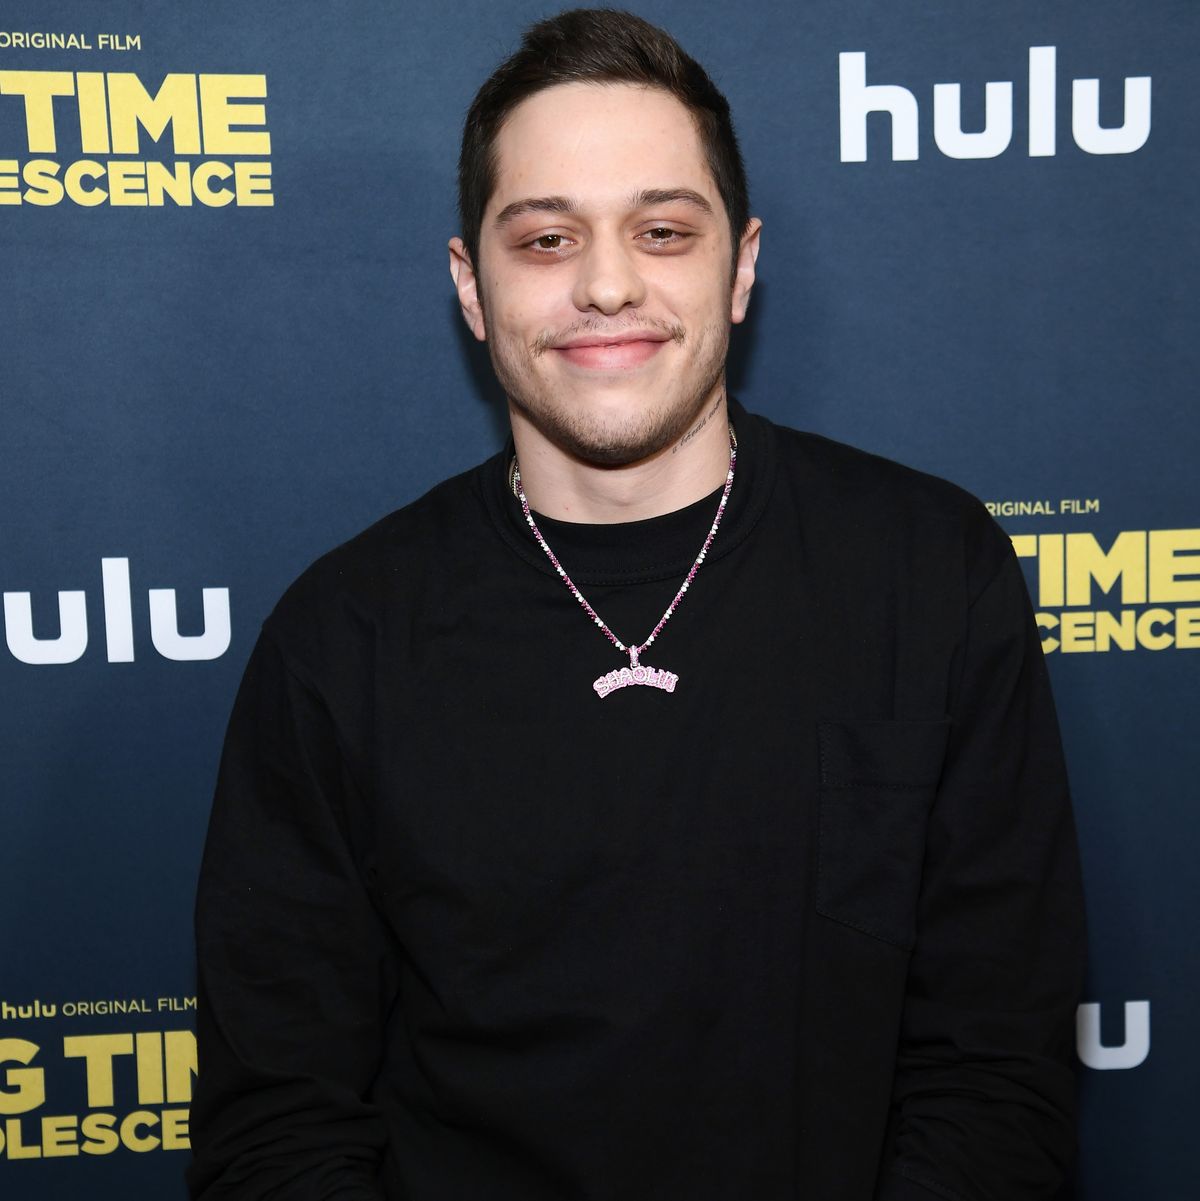 new york, new york march 05 pete davidson attends the premiere of big time adolescence at metrograph on march 05, 2020 in new york city photo by dimitrios kambourisgetty images